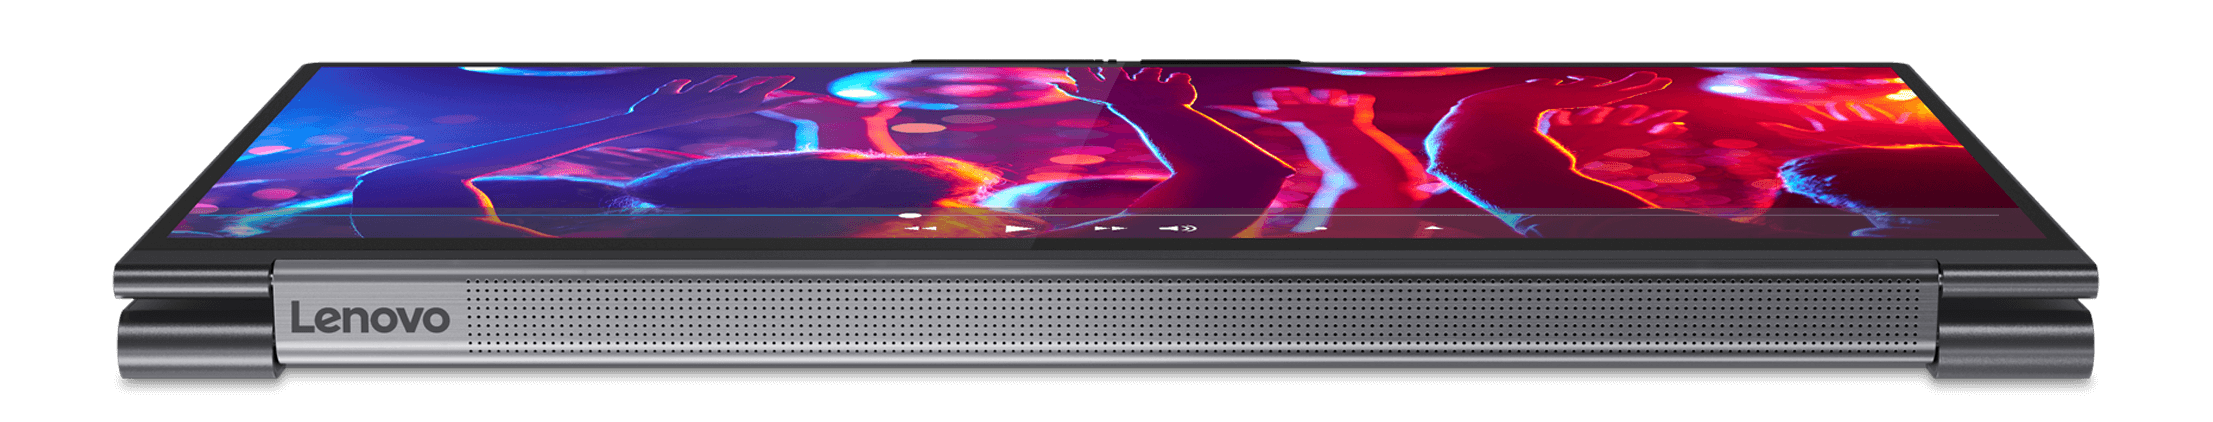 Lenovo Yoga 2-in-1, closed, showing sound bar